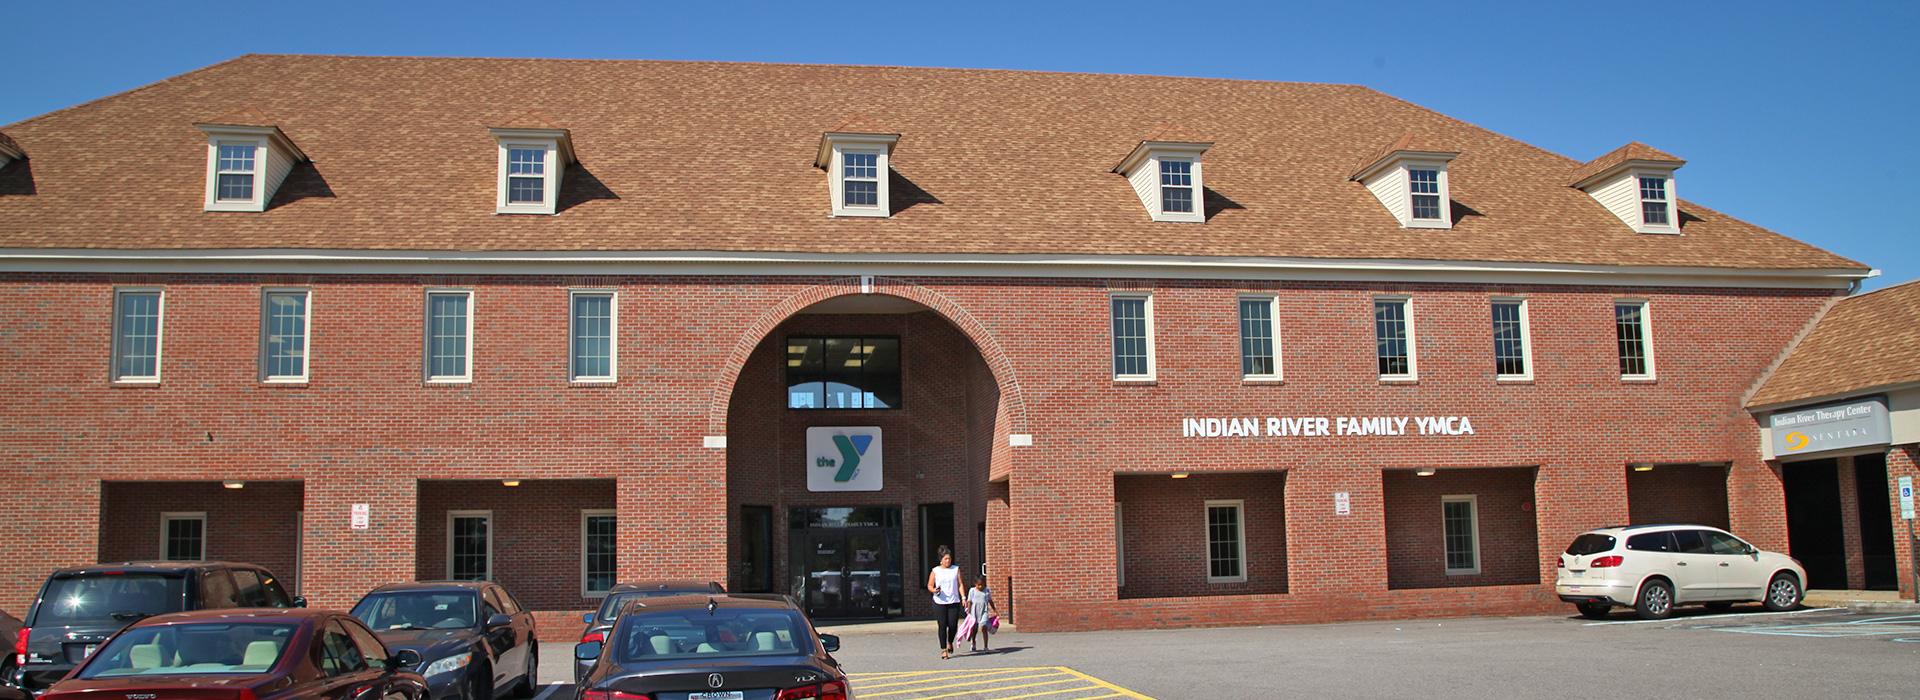 Indian River Family YMCA Outside View